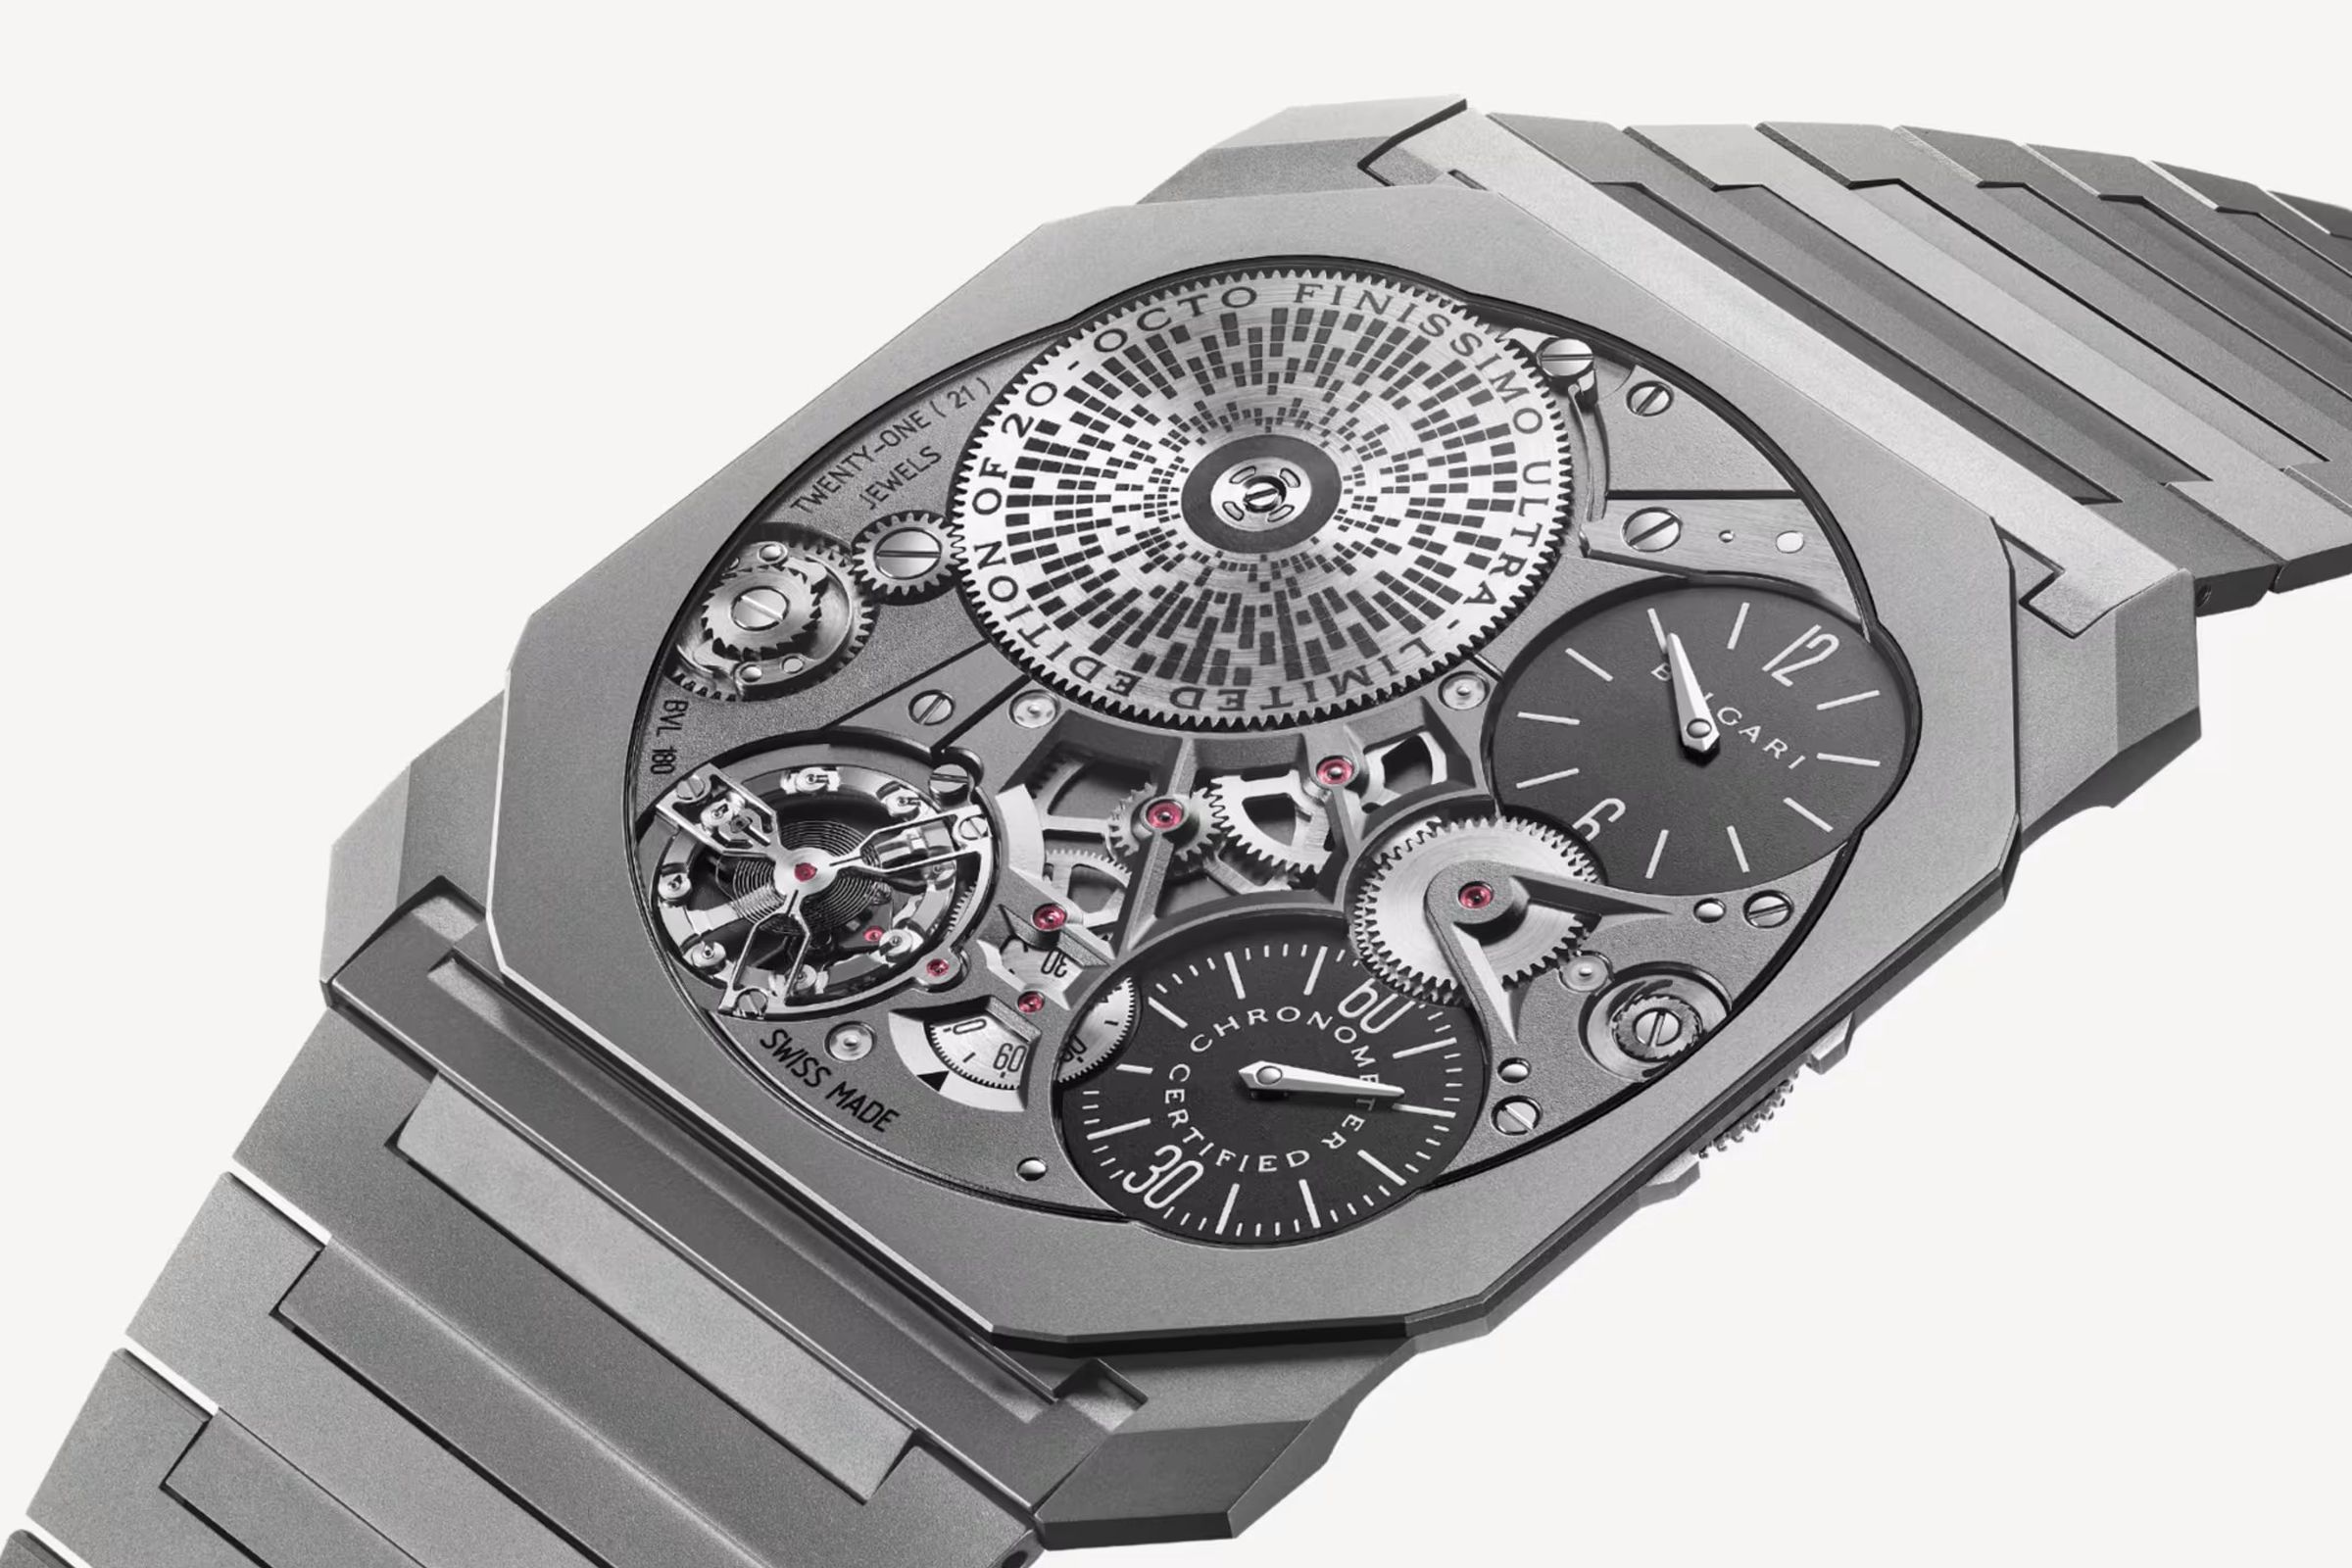 An image showing Bulgari’s Octo Finissimo Ultra COSC watch